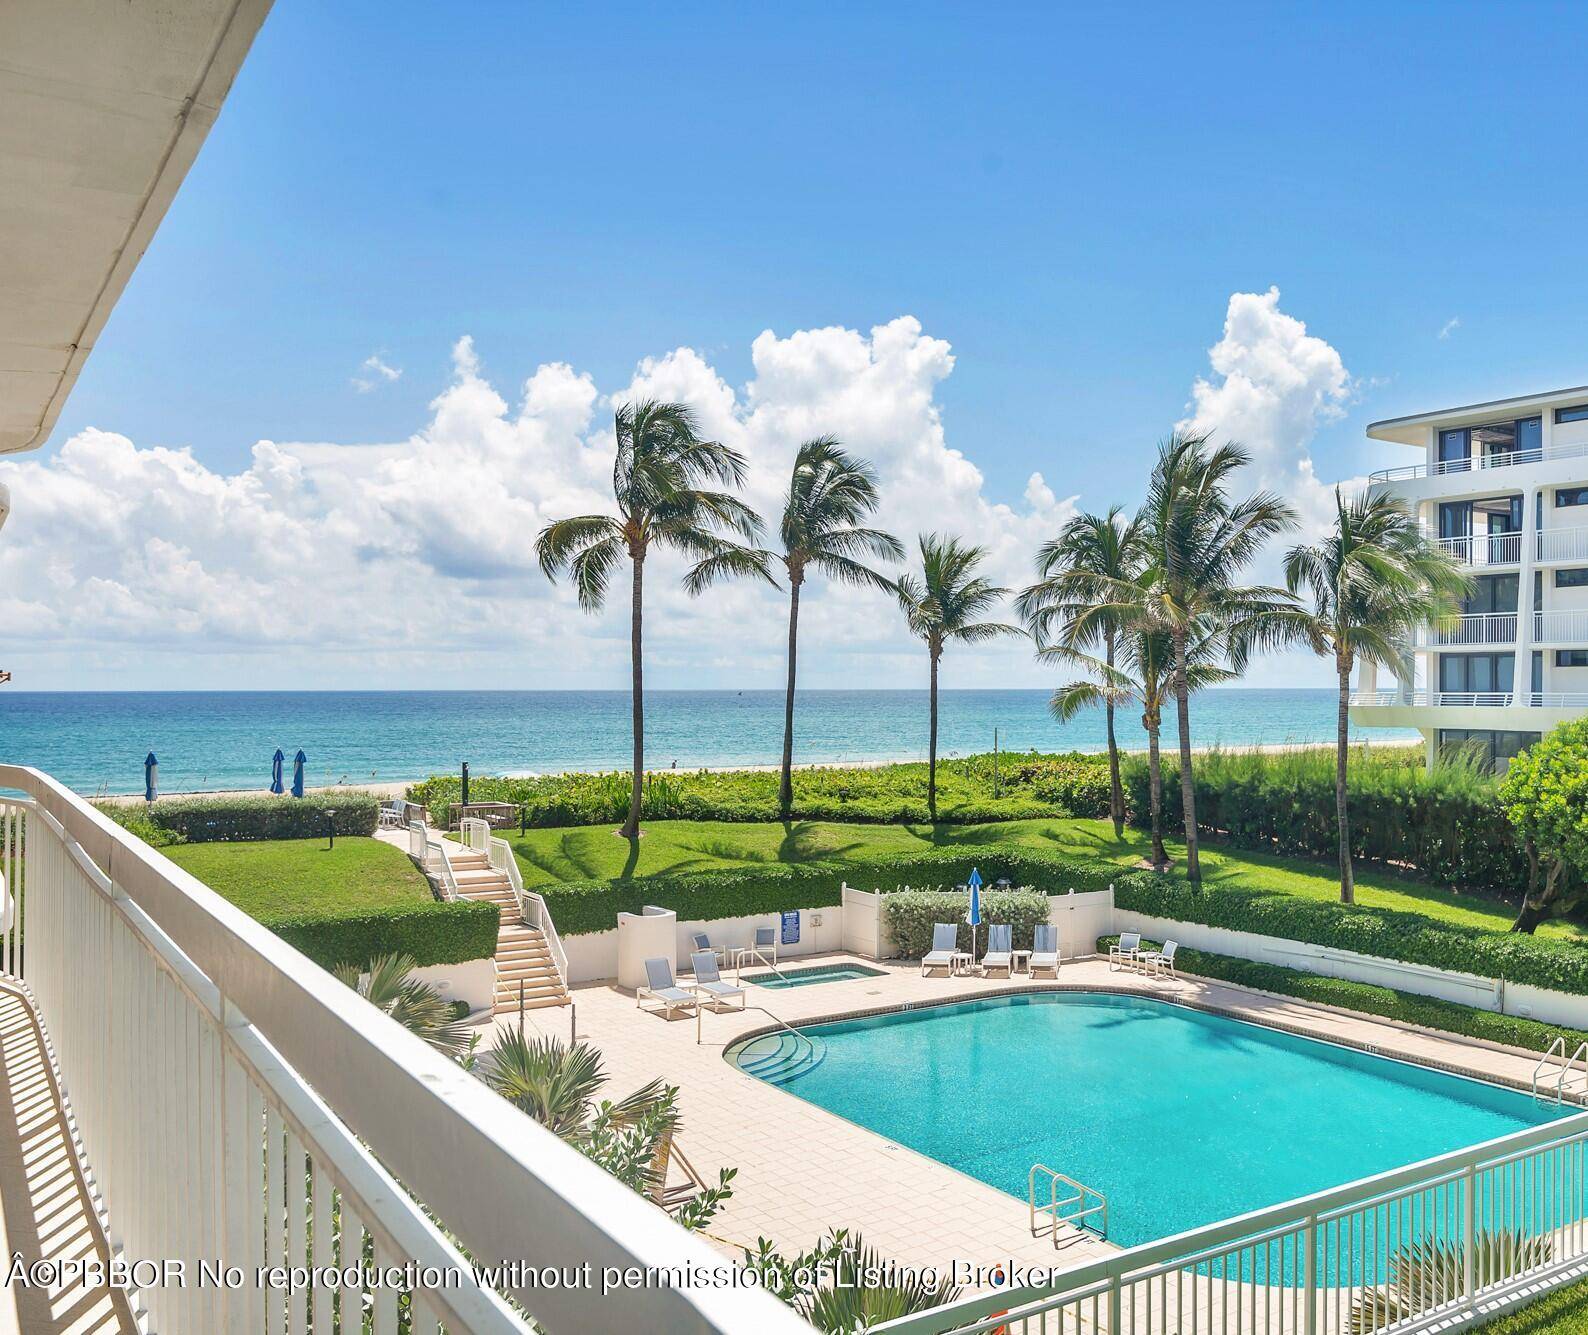 Private and exclusive oceanfront condo with 2 car garage parking.